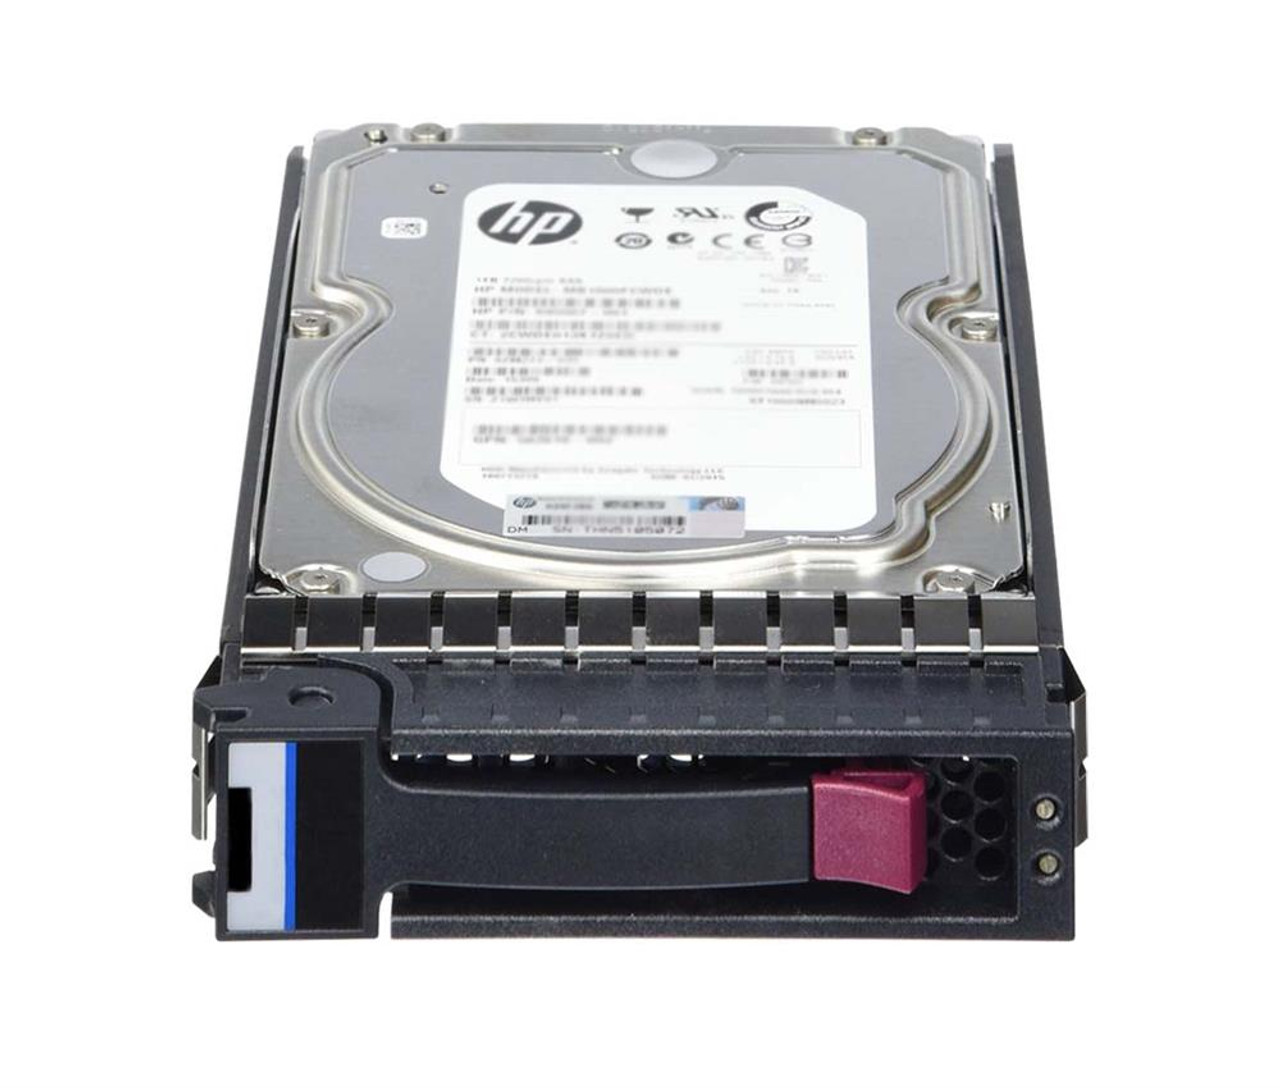 857965-001 HPE 10TB 7200RPM SAS 12Gbps Midline (512e) 3.5-inch Internal Hard Drive with Smart Carrier